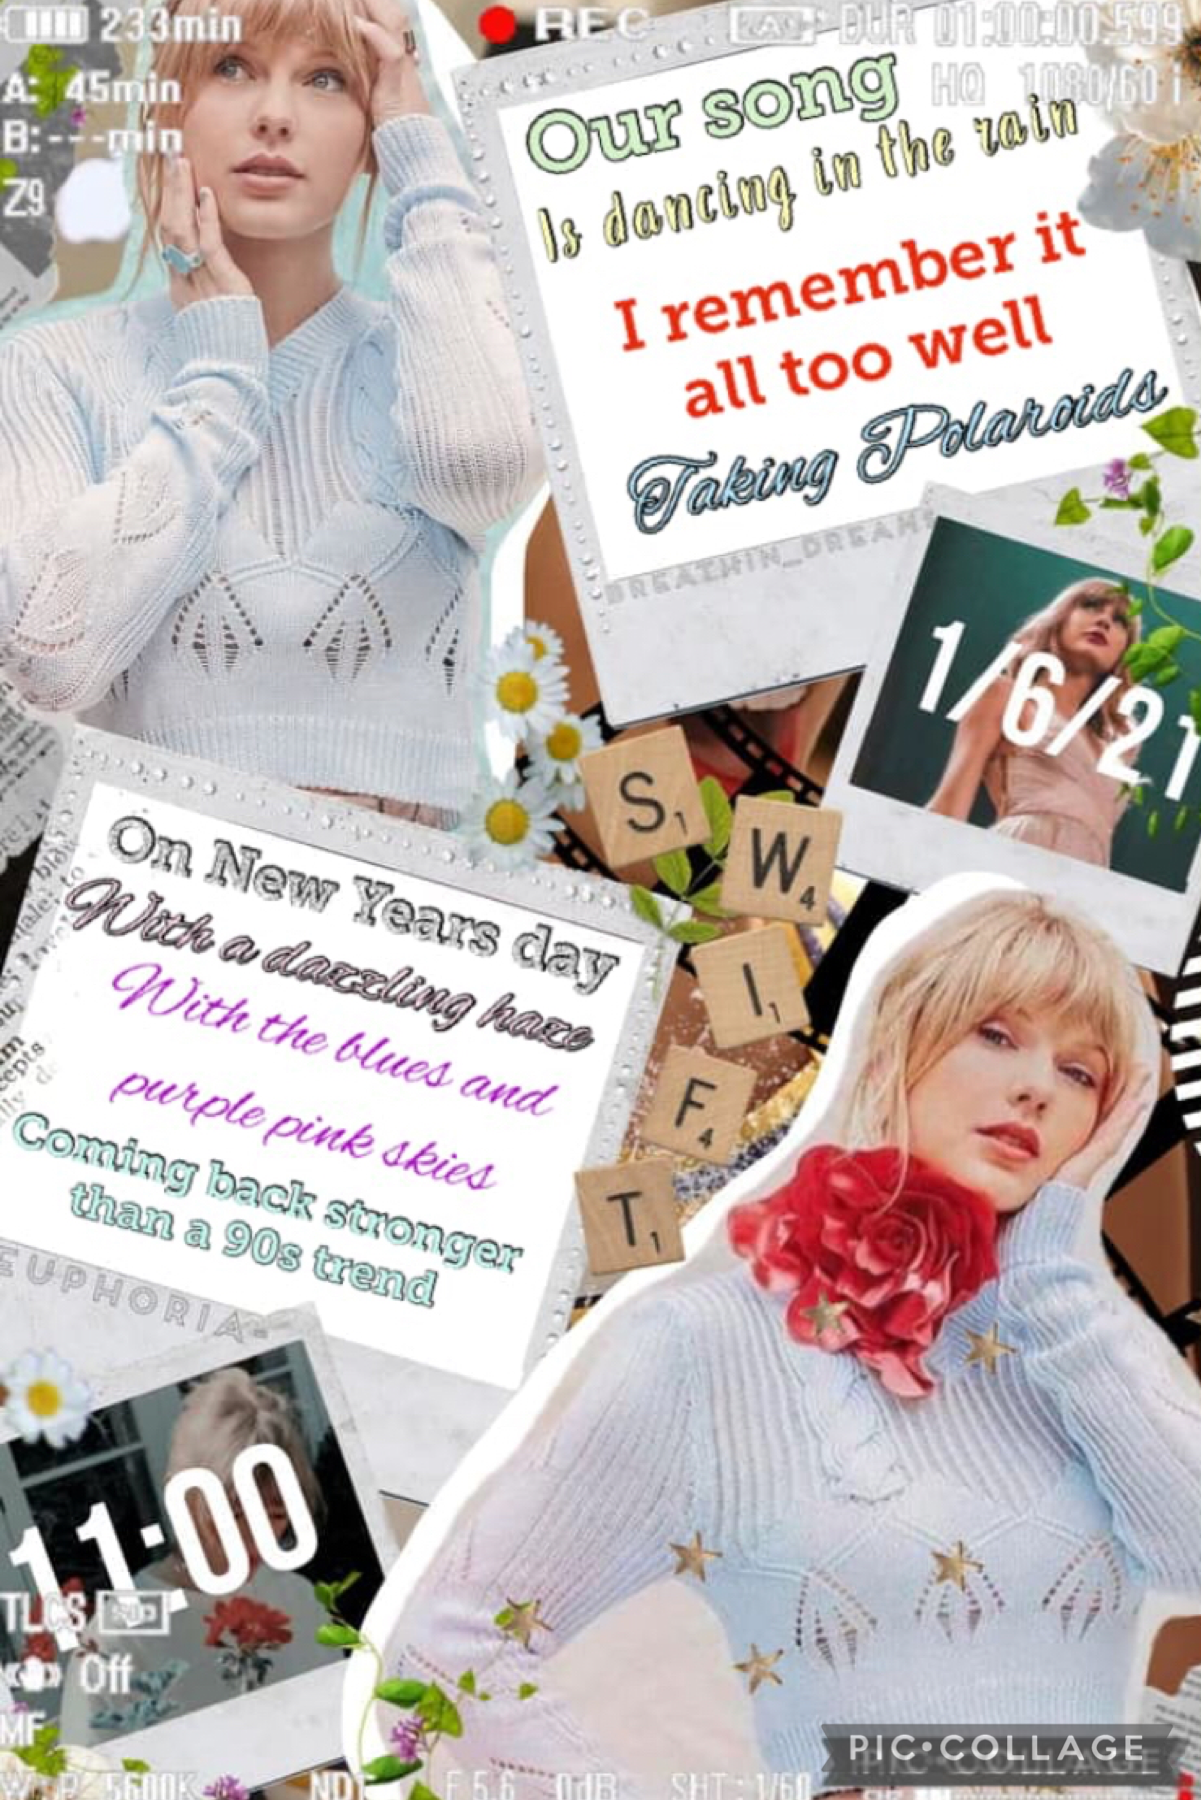 Taylor Swift collage and collab with Euphoria 